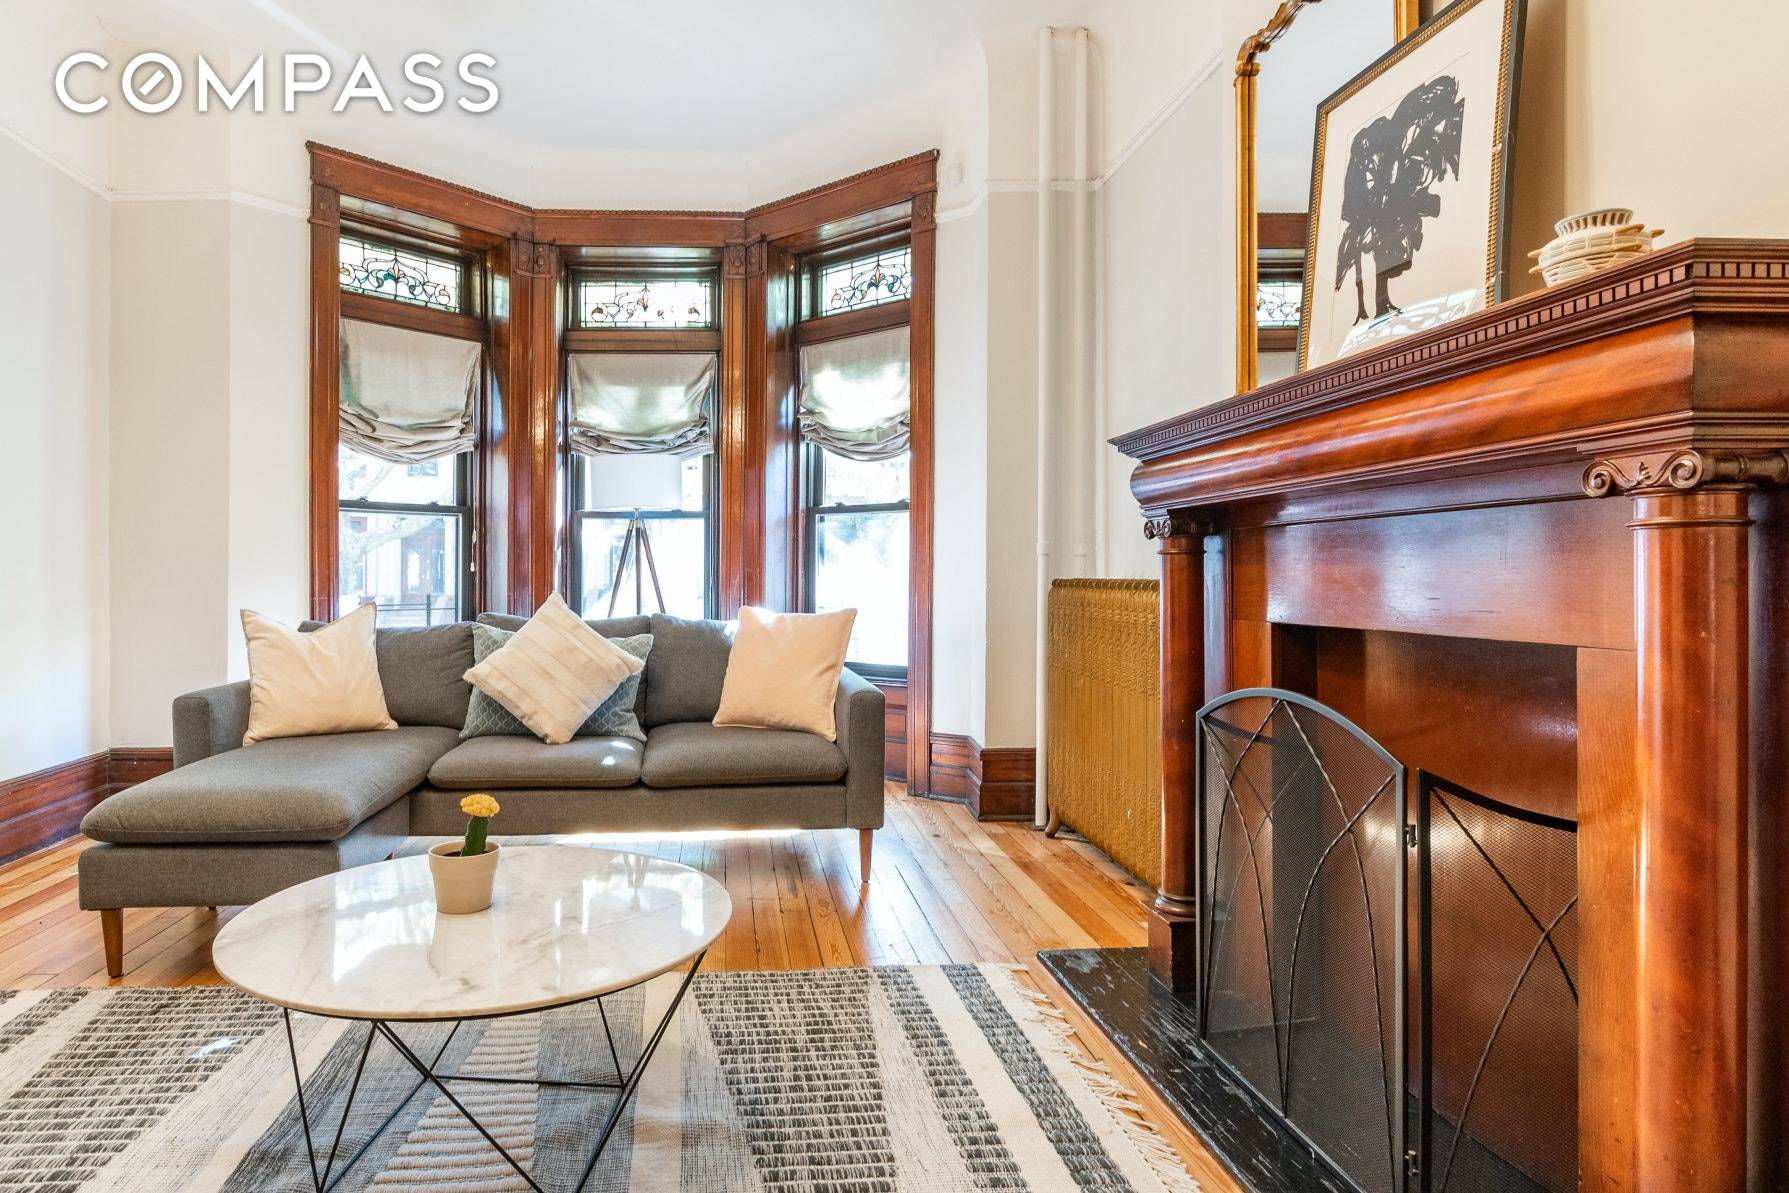 Experience Brooklyn townhouse living in style in this impeccably renovated 19th century Duplex with 5 bedrooms, 2 stylish full bathrooms, contemporary chef's kitchen, laundry and a large private backyard.